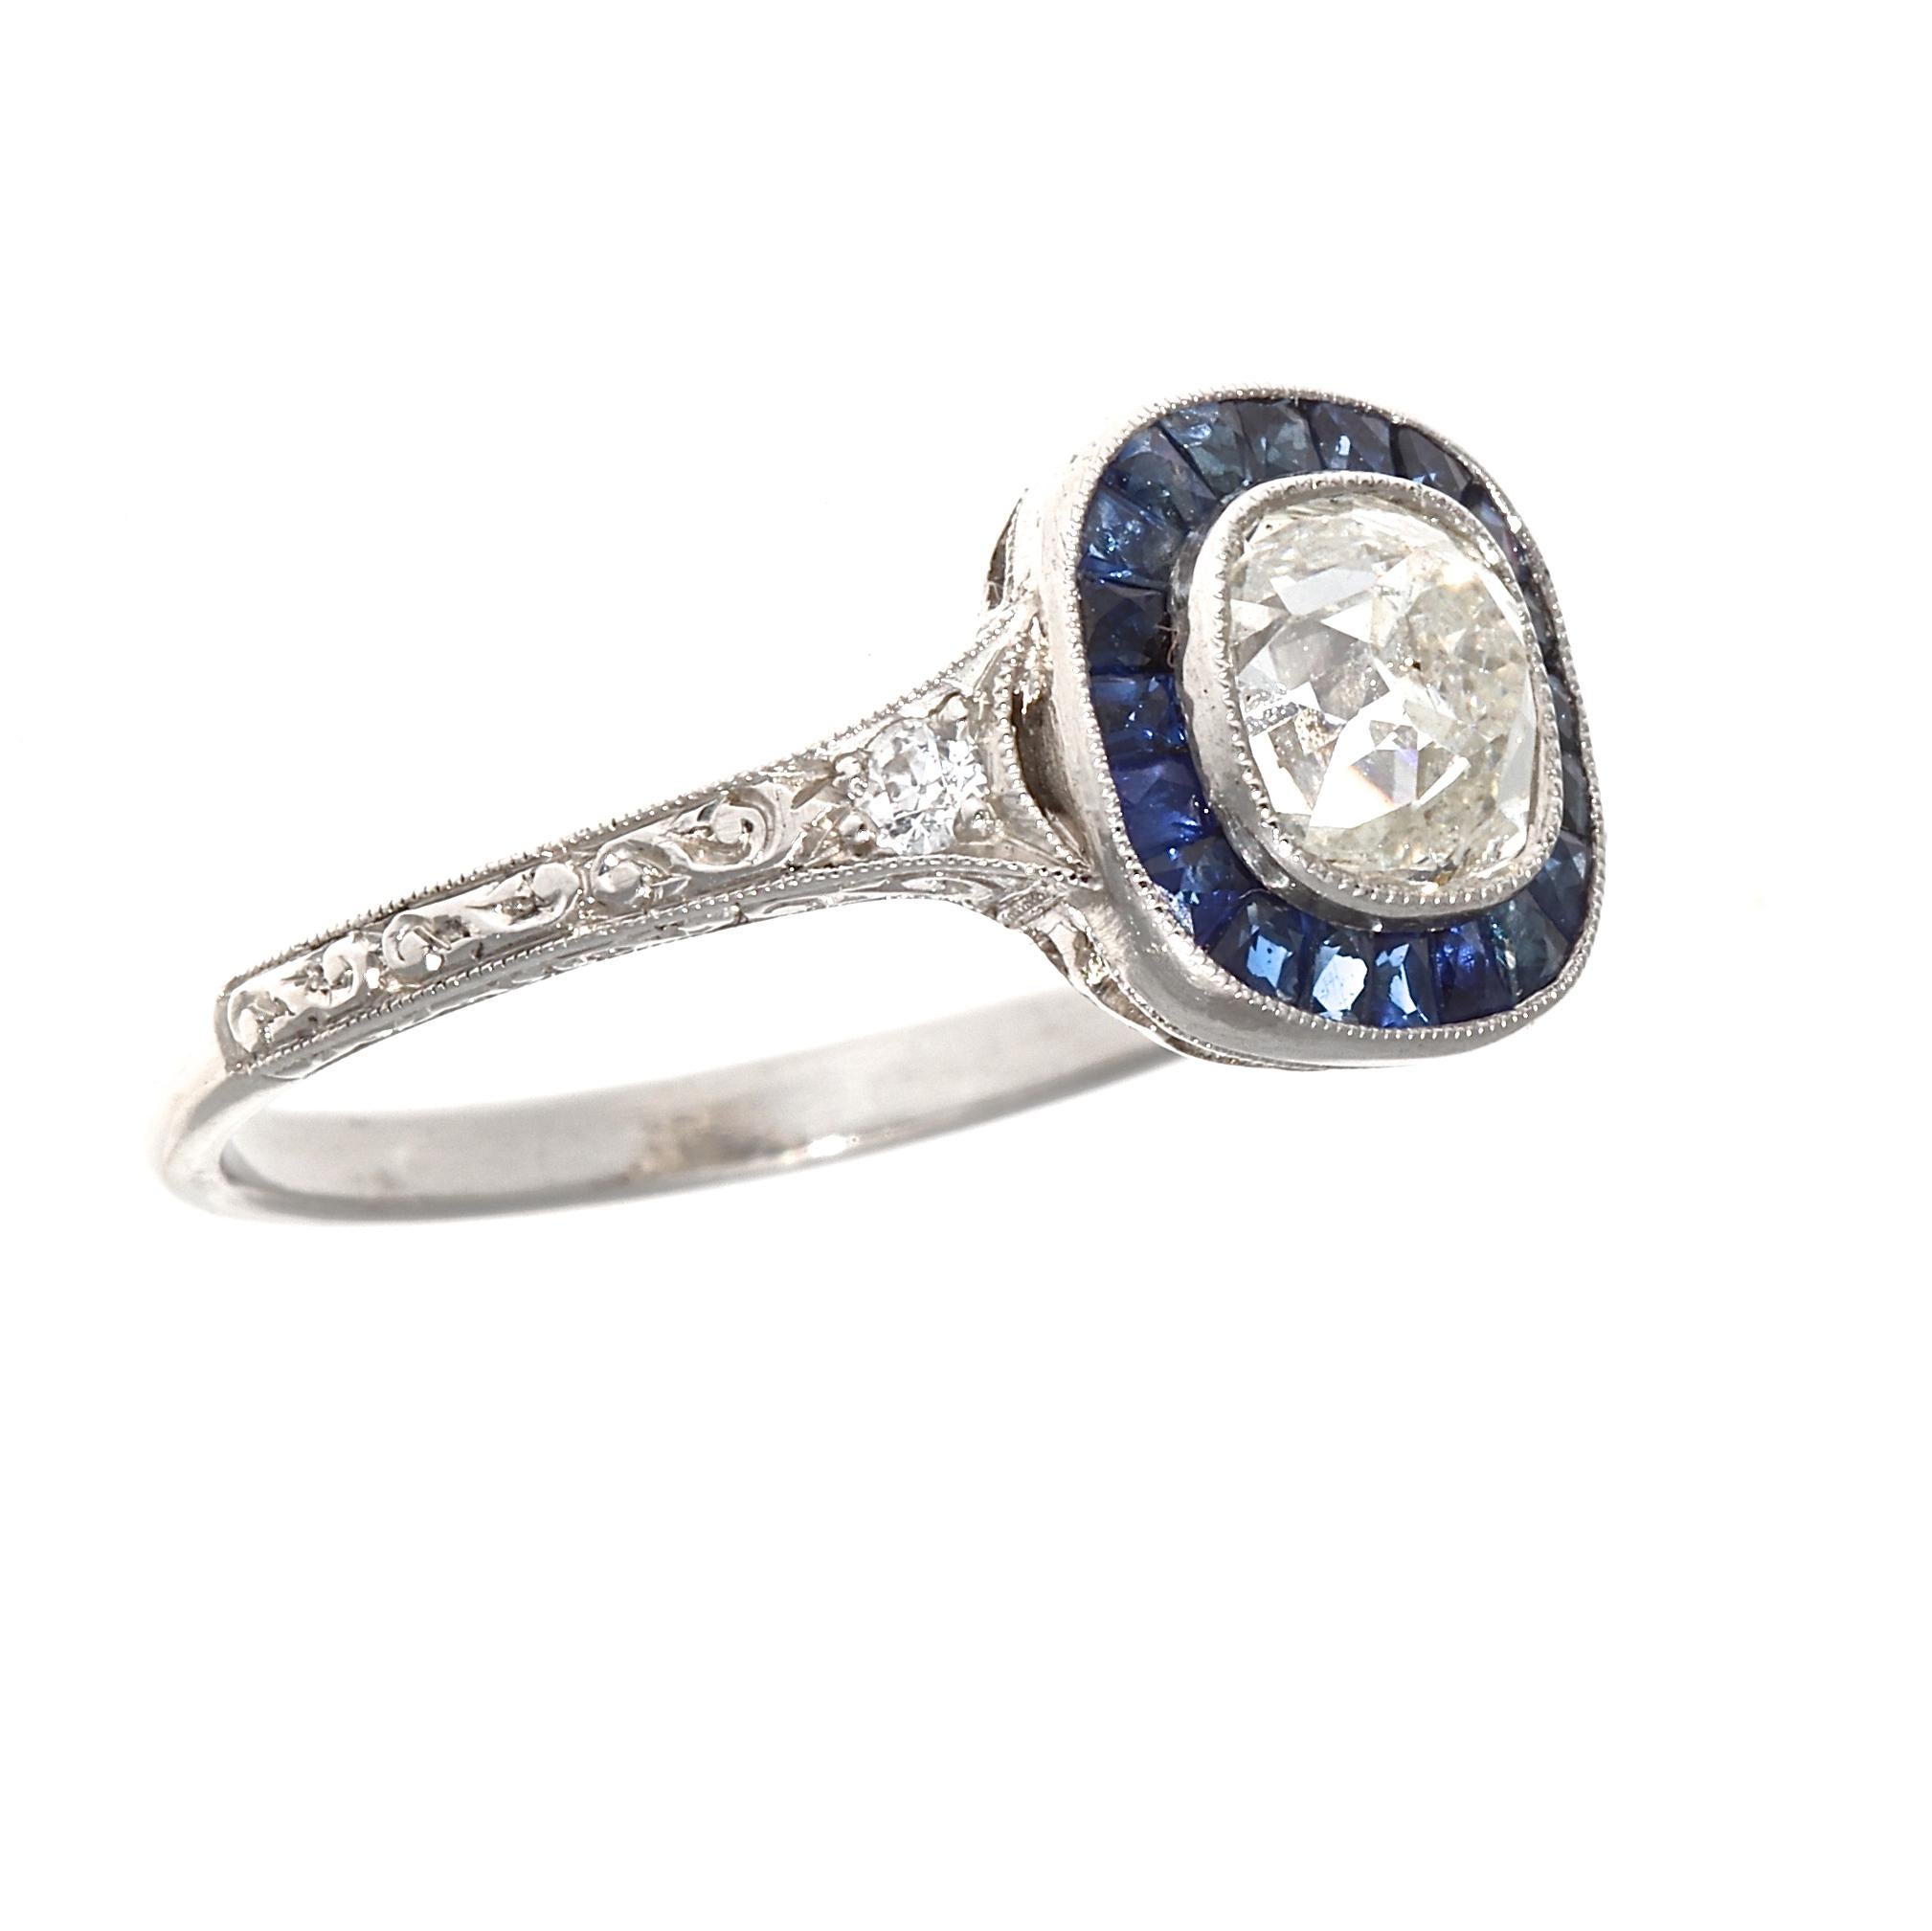 Steeped in the tradition of the romantic and elegant art deco era. Featuring a 1.07 carat old mine cut diamond that is I color, SI2 clarity. Surrounded by a radiating halo of royal blue sapphires. Hand crafted in platinum. Ring size 7 and can easily